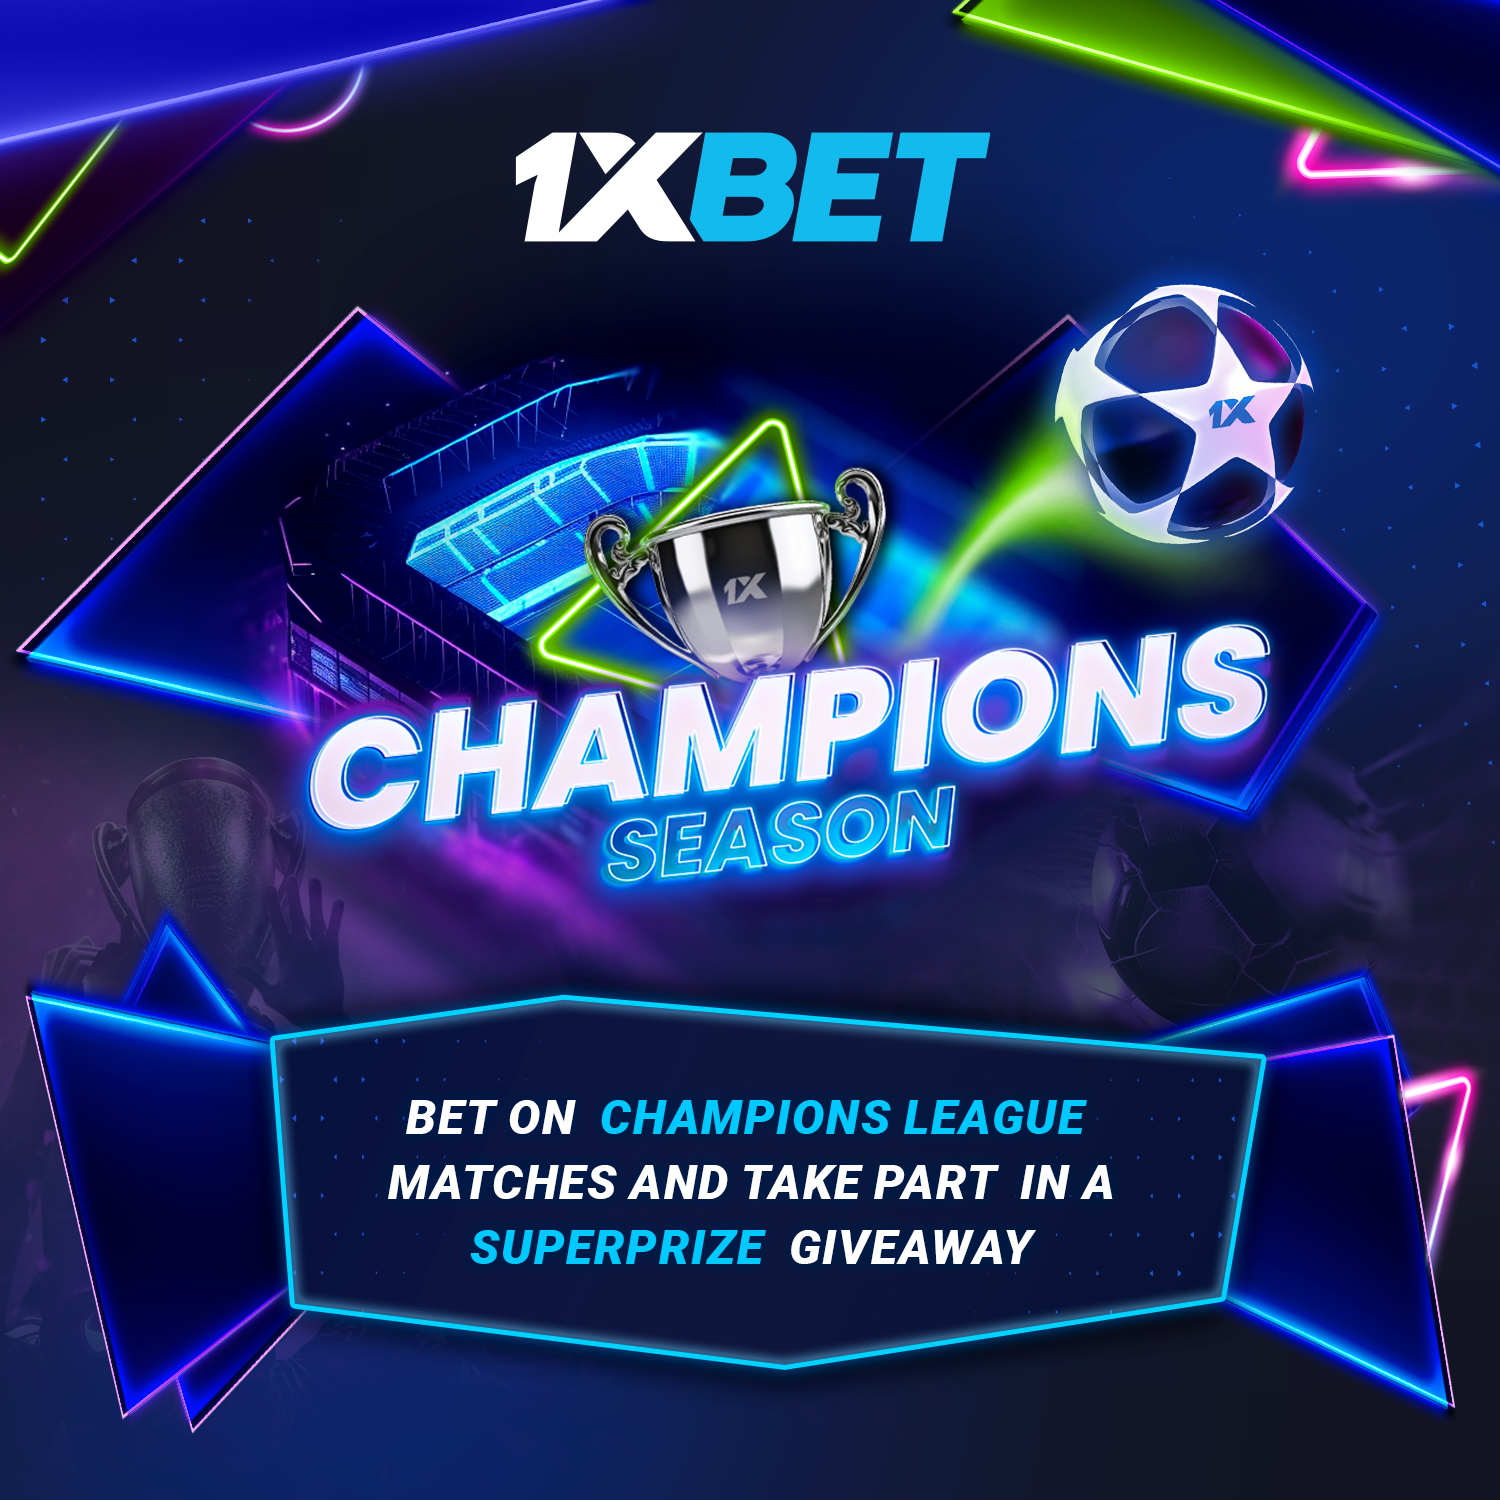 1xBet Champions Season: Wager on Champions League Matches & Stand a Chance to Win 50,000 USD